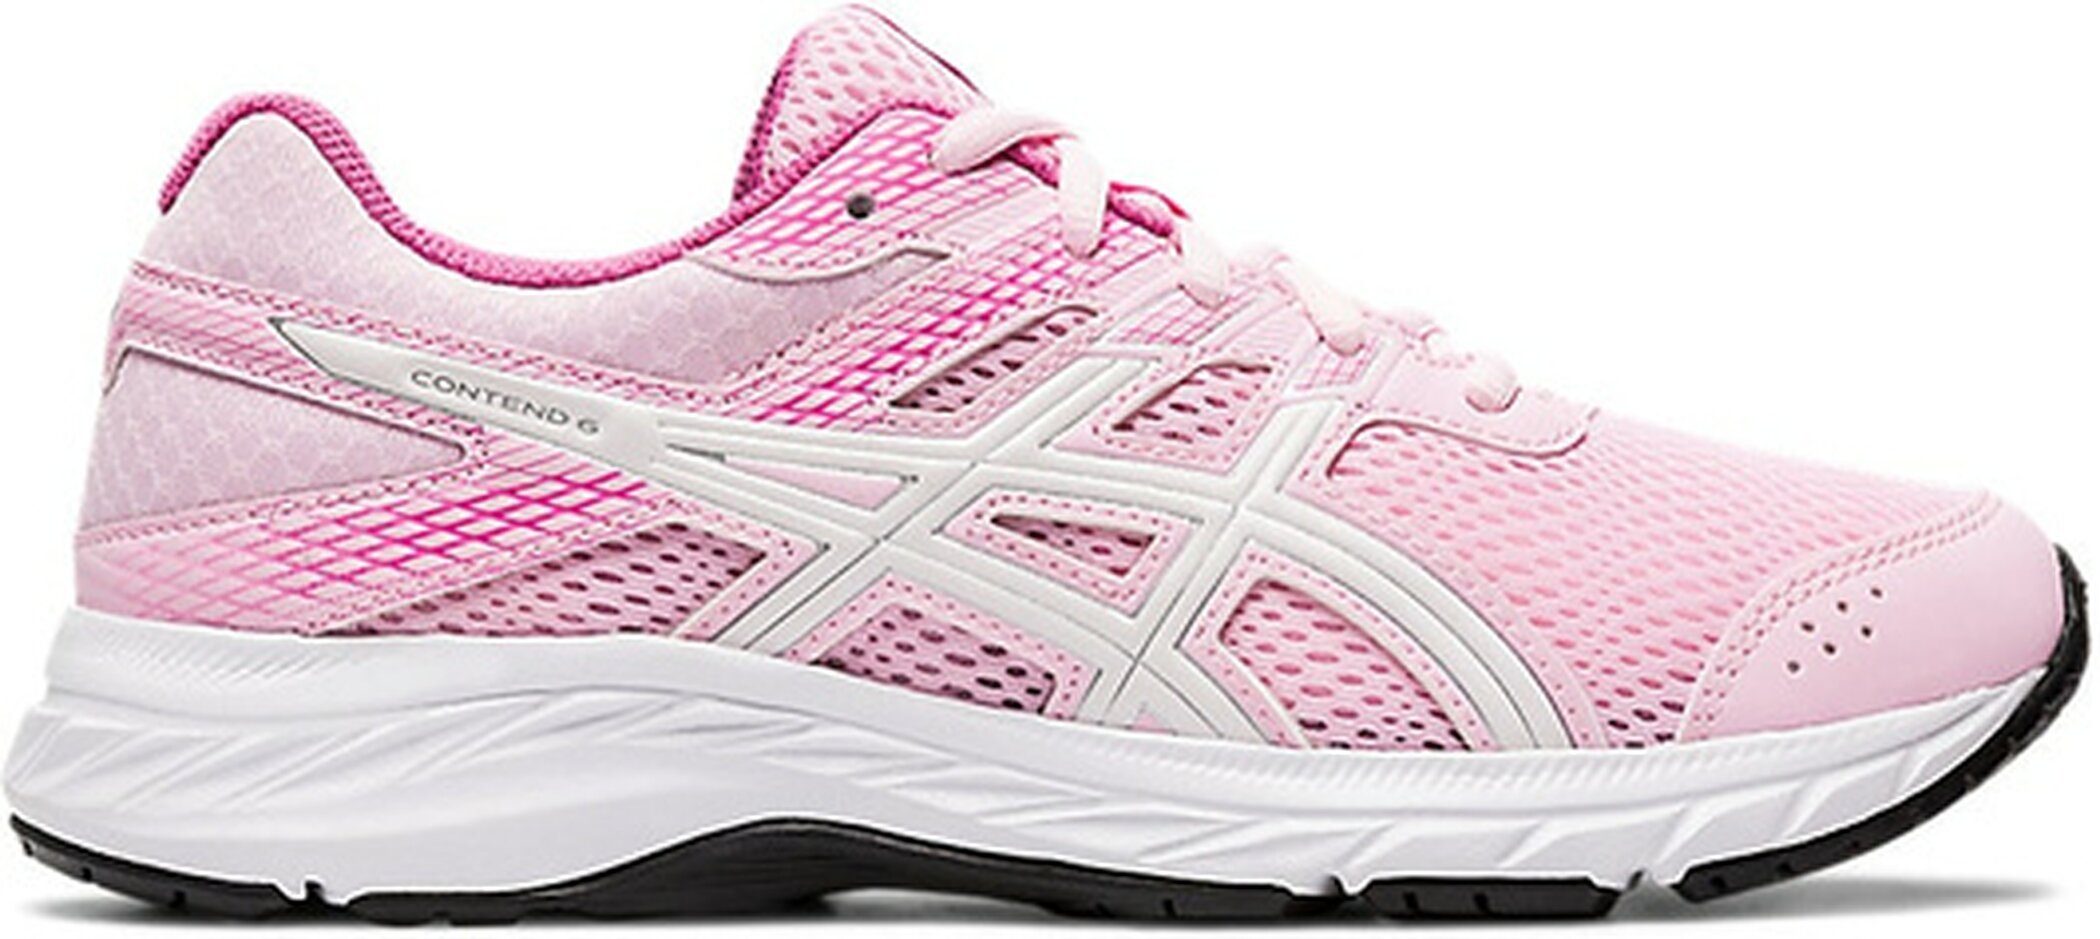 GS 6 PINK CAMEO/ROSELLE CONTEND Asics Laufschuh